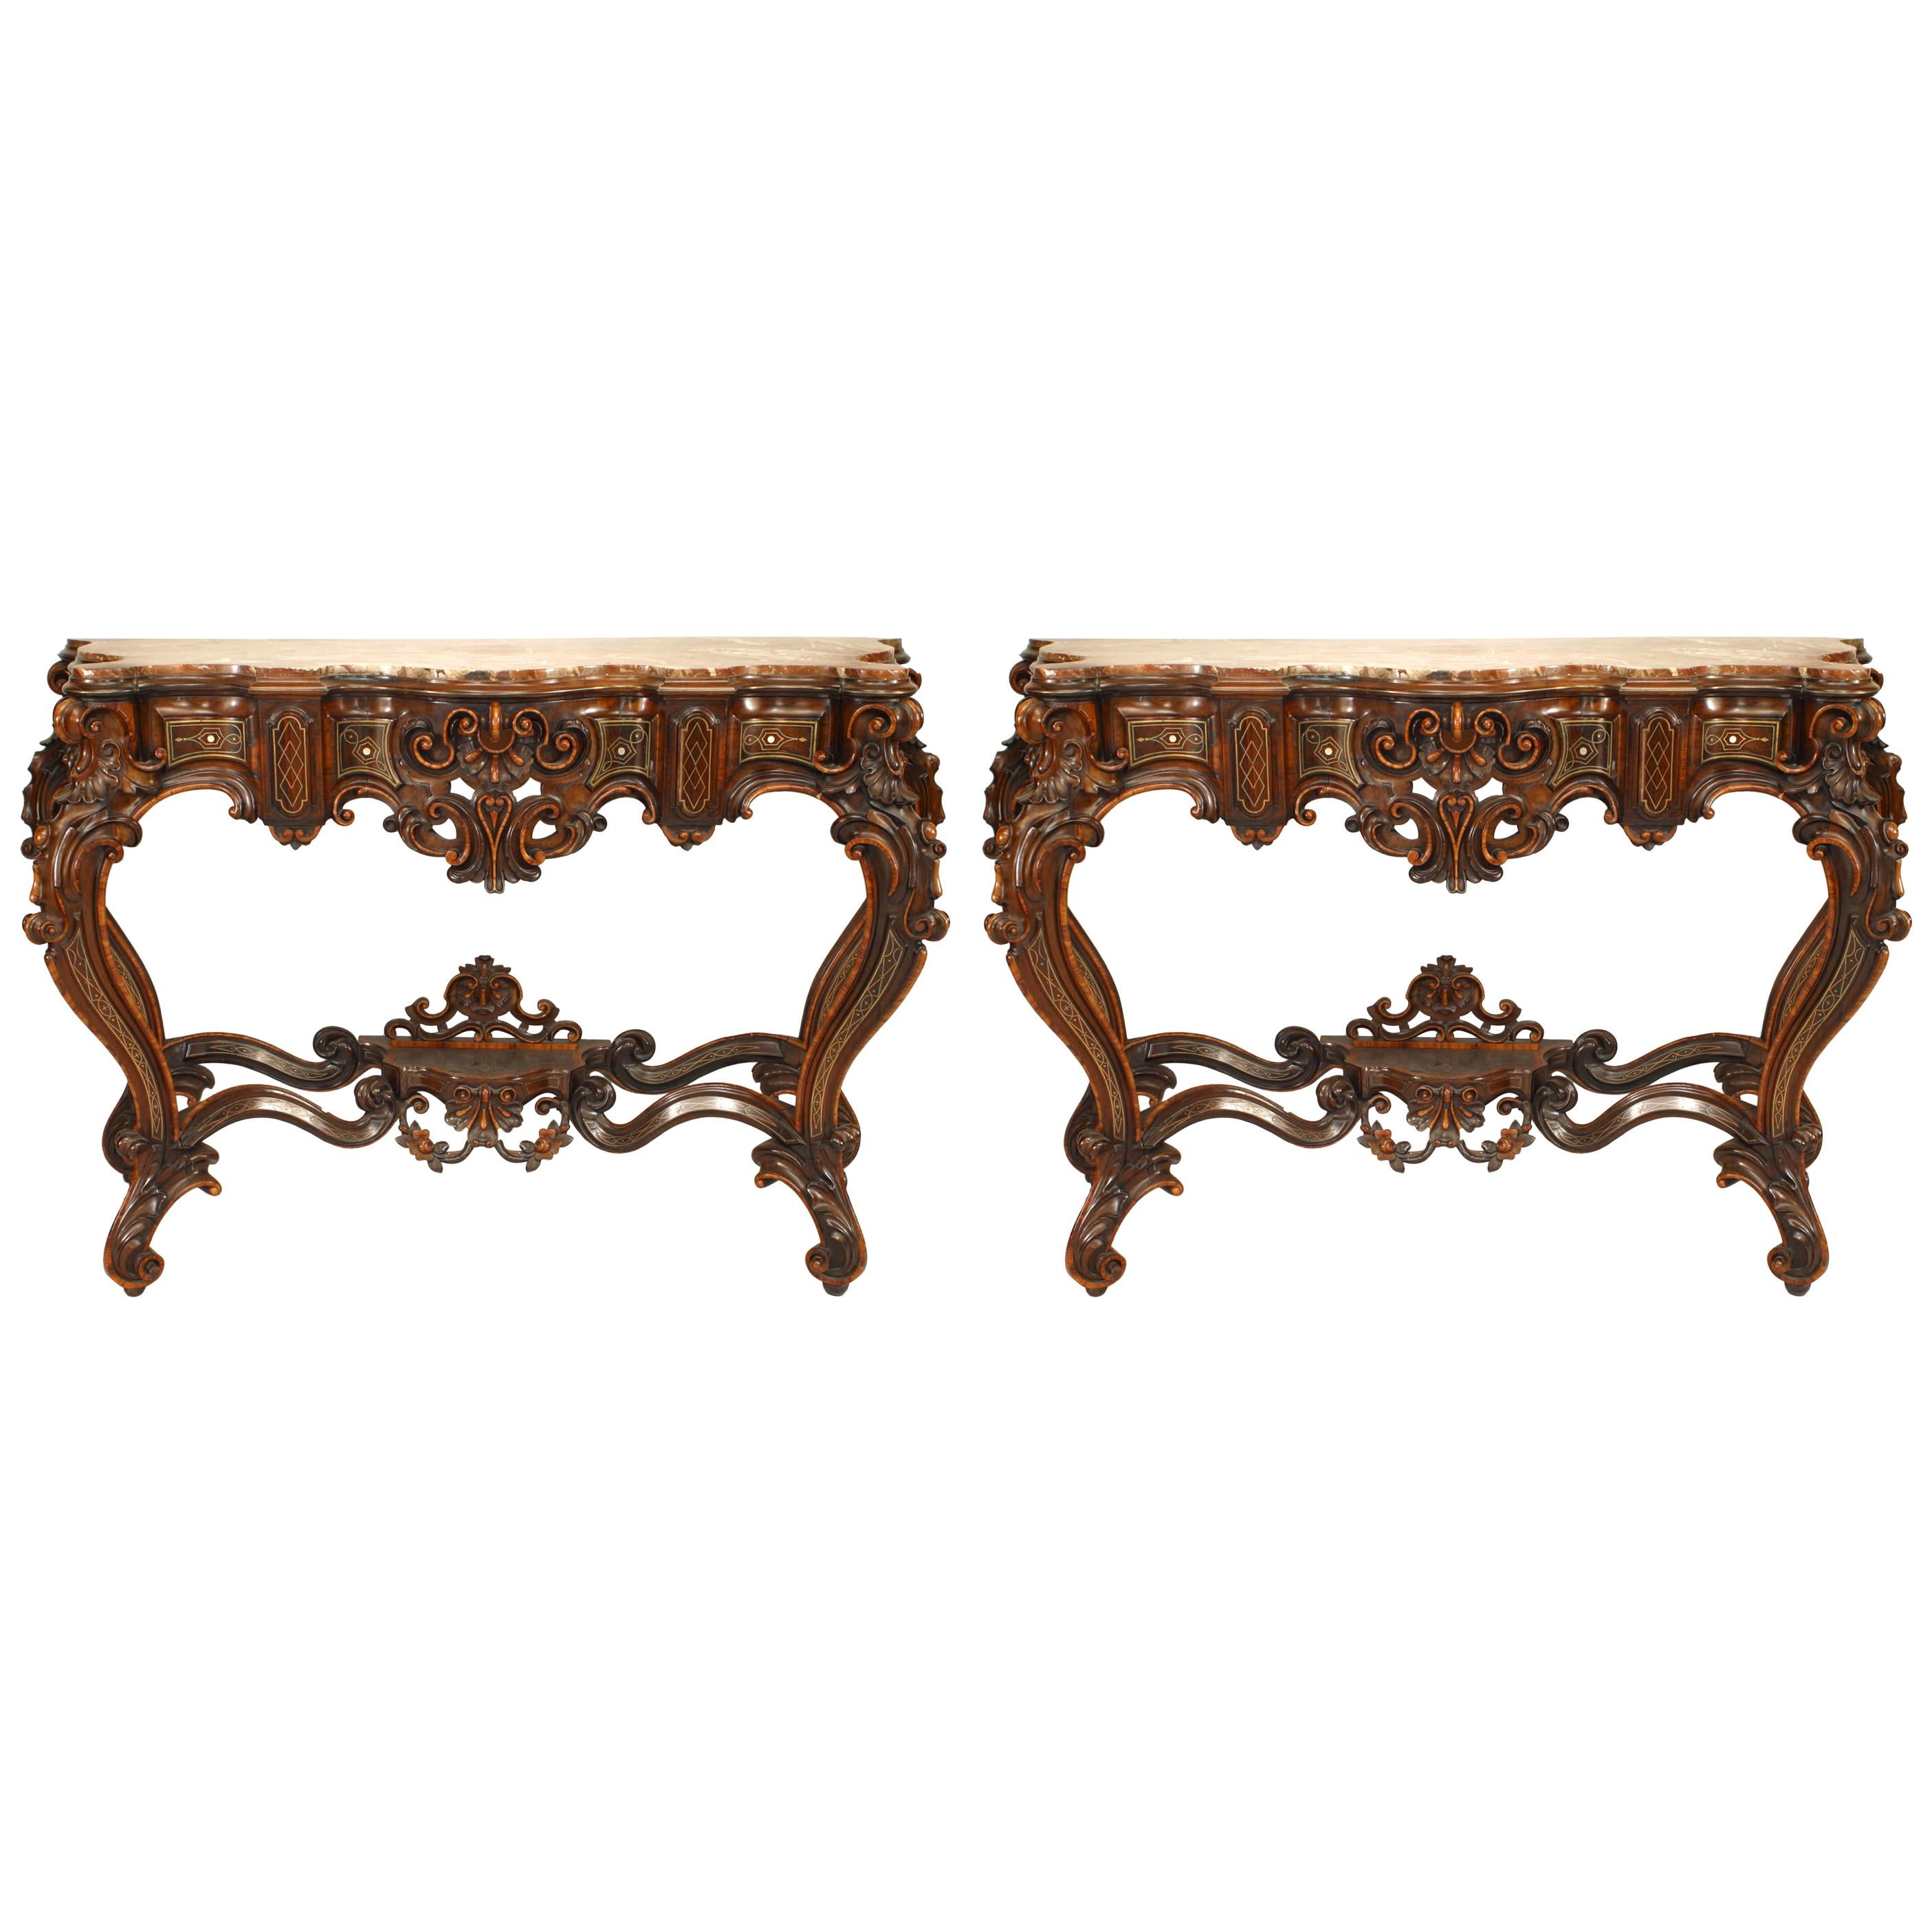 Pair of Italian Rococo Rosewood Marble Top Console Tables (Manner of Gotti)